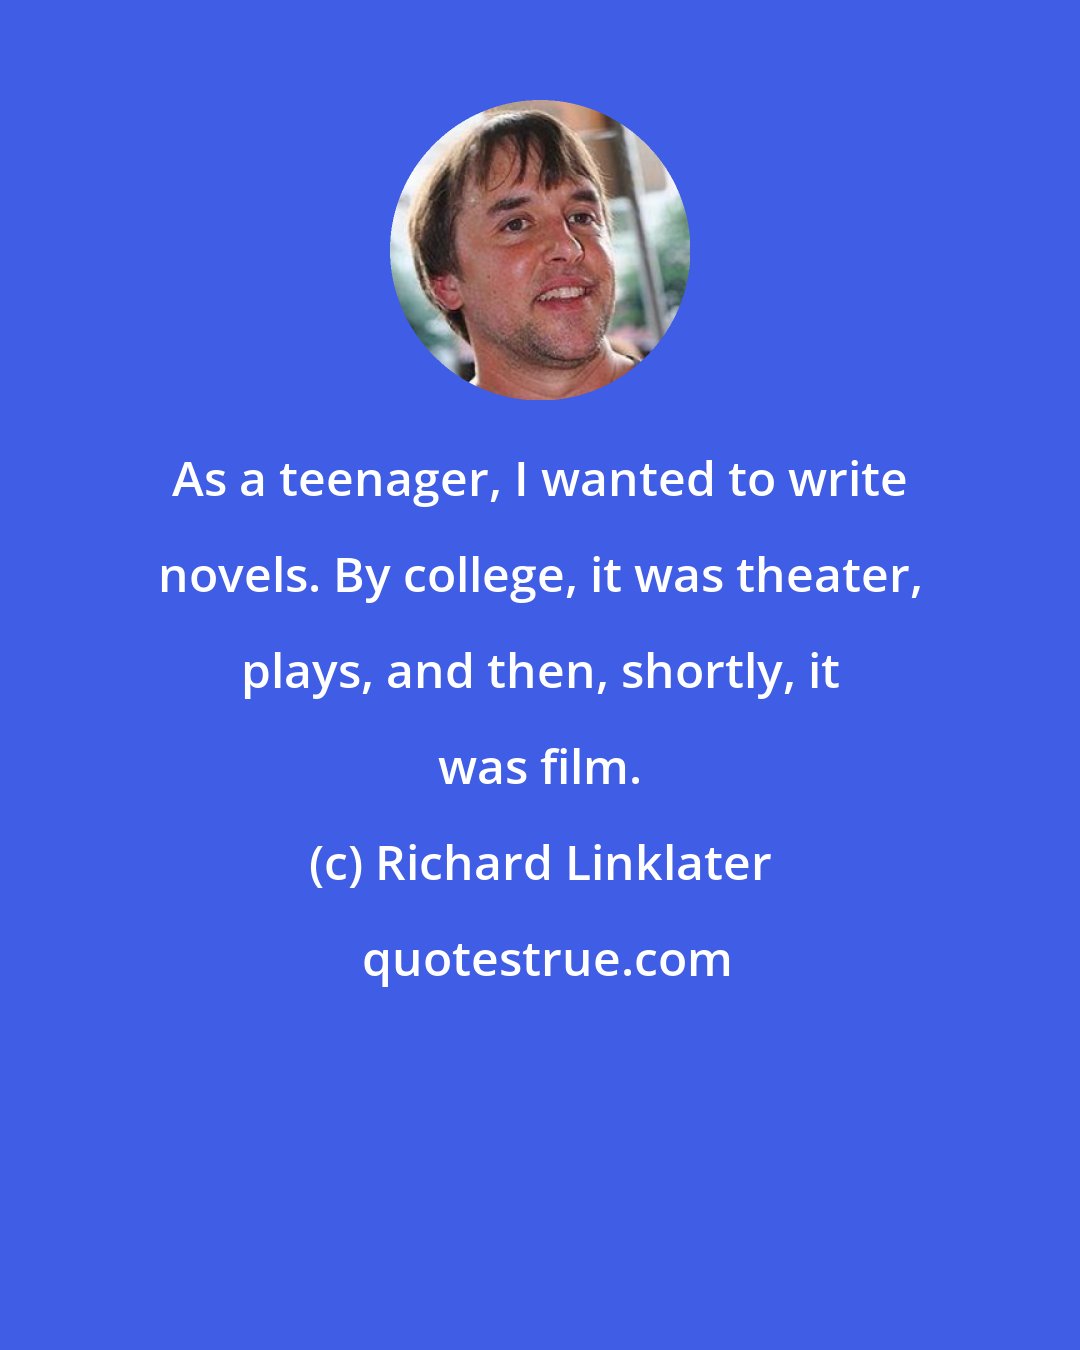 Richard Linklater: As a teenager, I wanted to write novels. By college, it was theater, plays, and then, shortly, it was film.